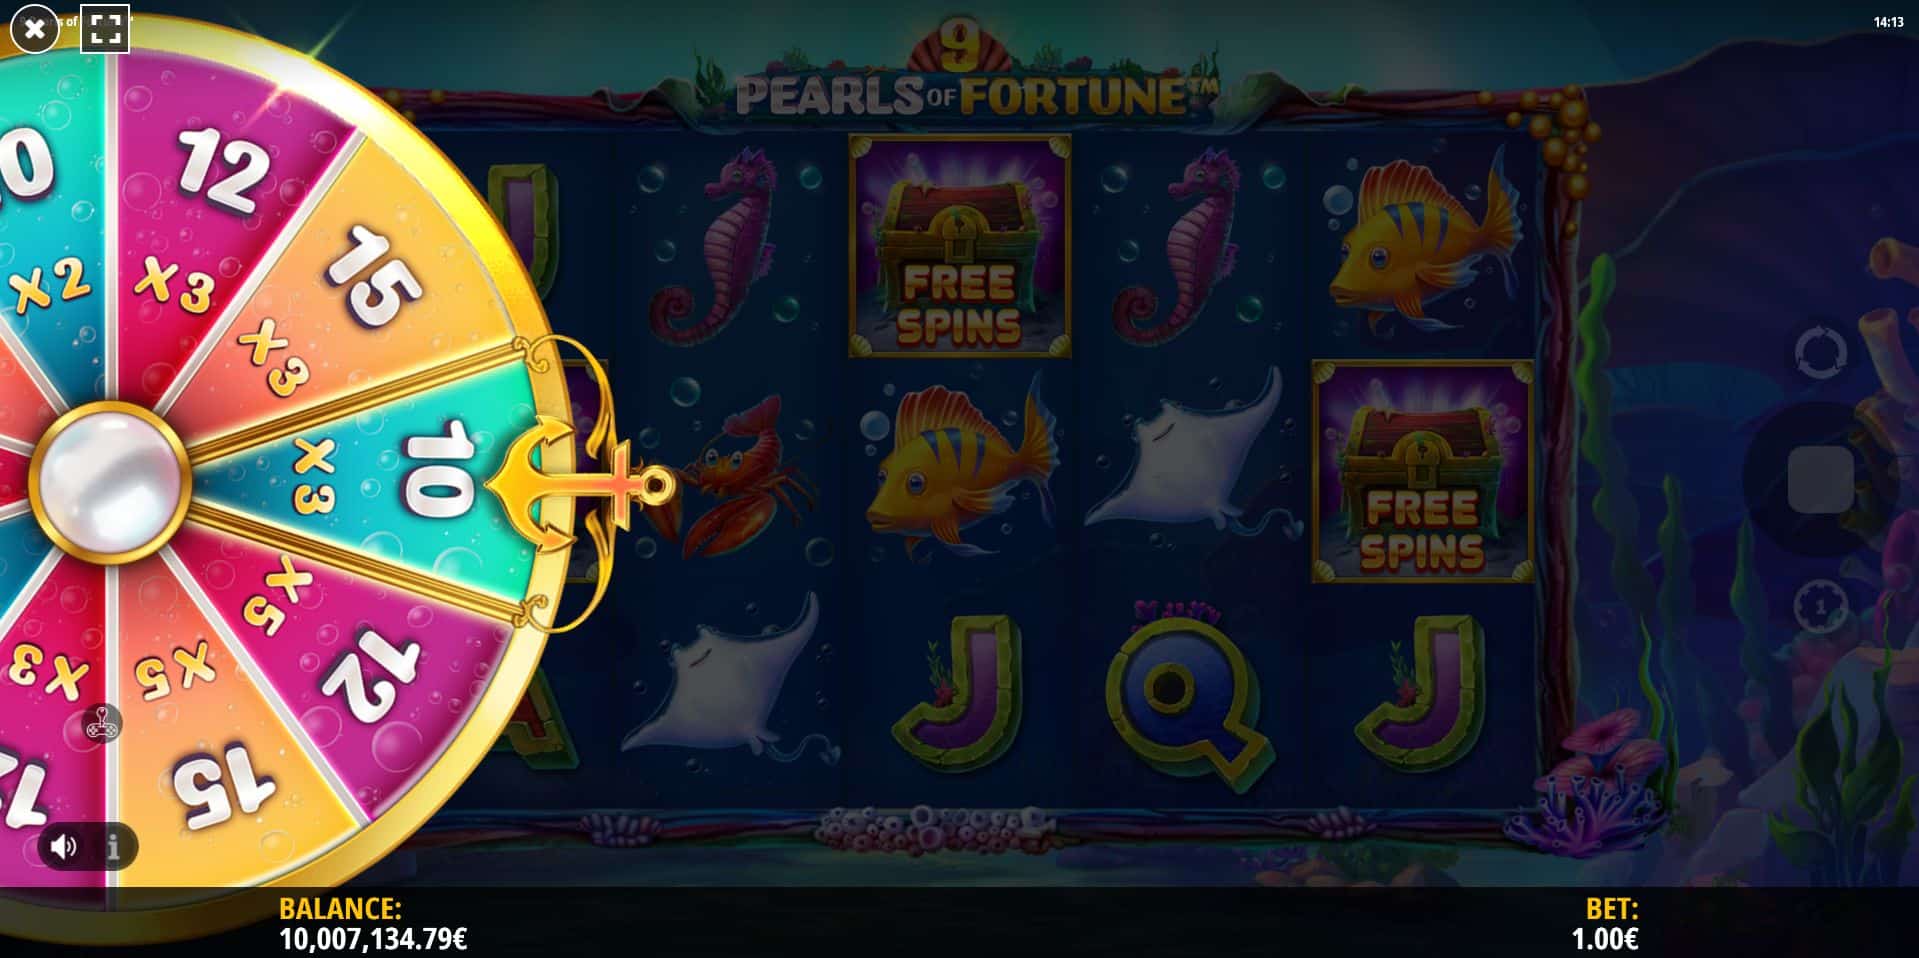 9 Pearls of Fortune Free Spins Wheel